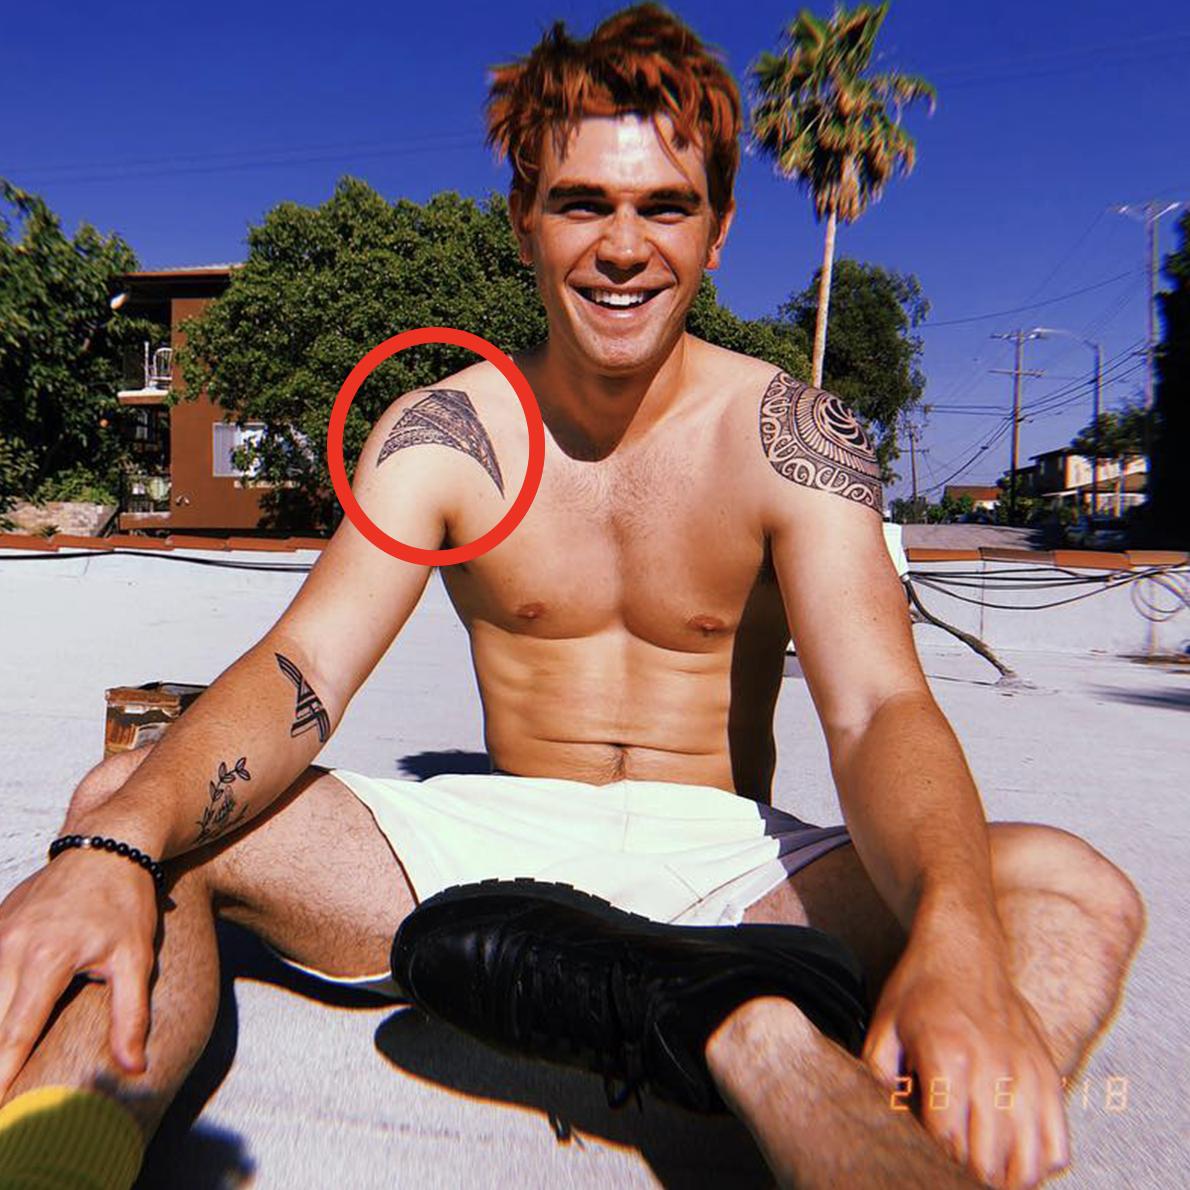 KJ Apa Age, Who He's With Romantically & His Natural Hair